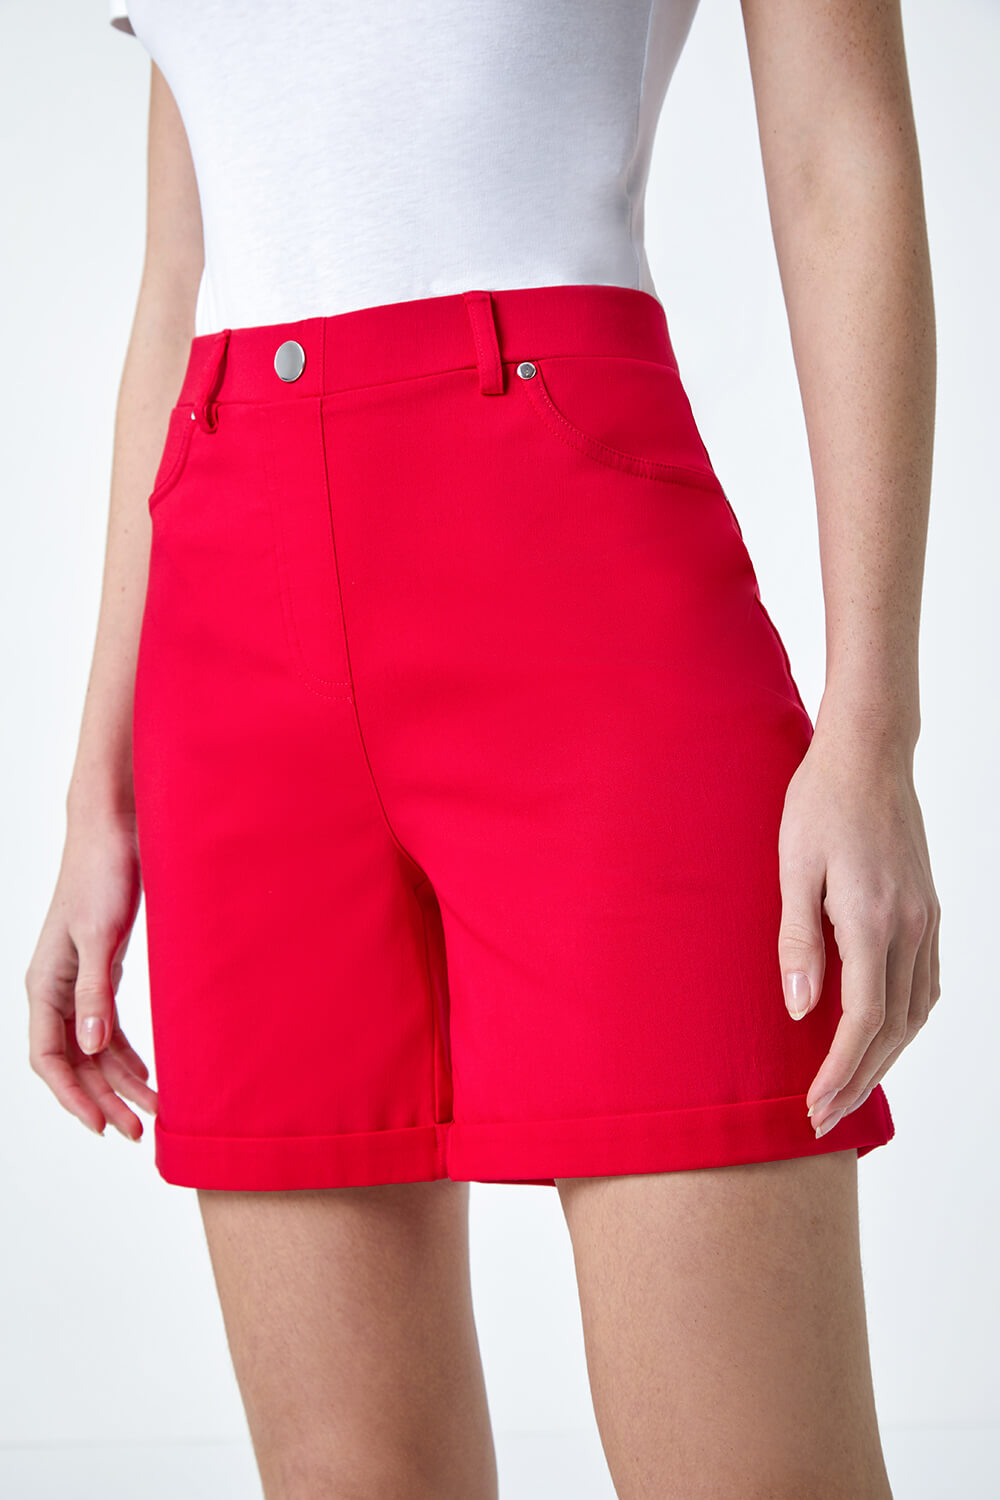 Red Stretch Turn Up Shorts, Image 5 of 5